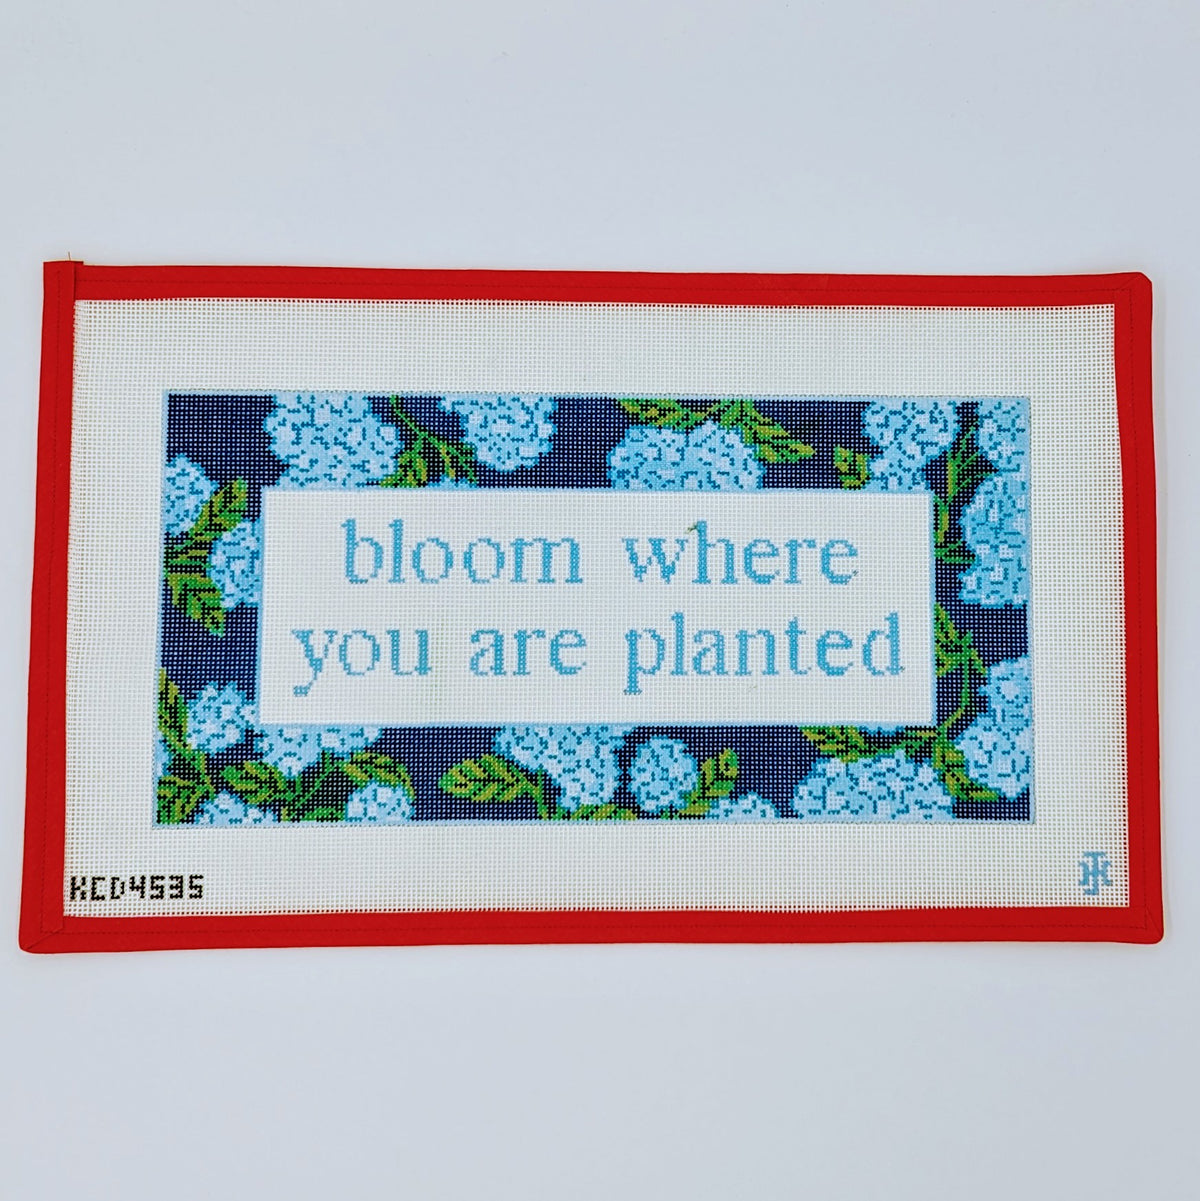 Bloom Where You Are Planted (Blue)